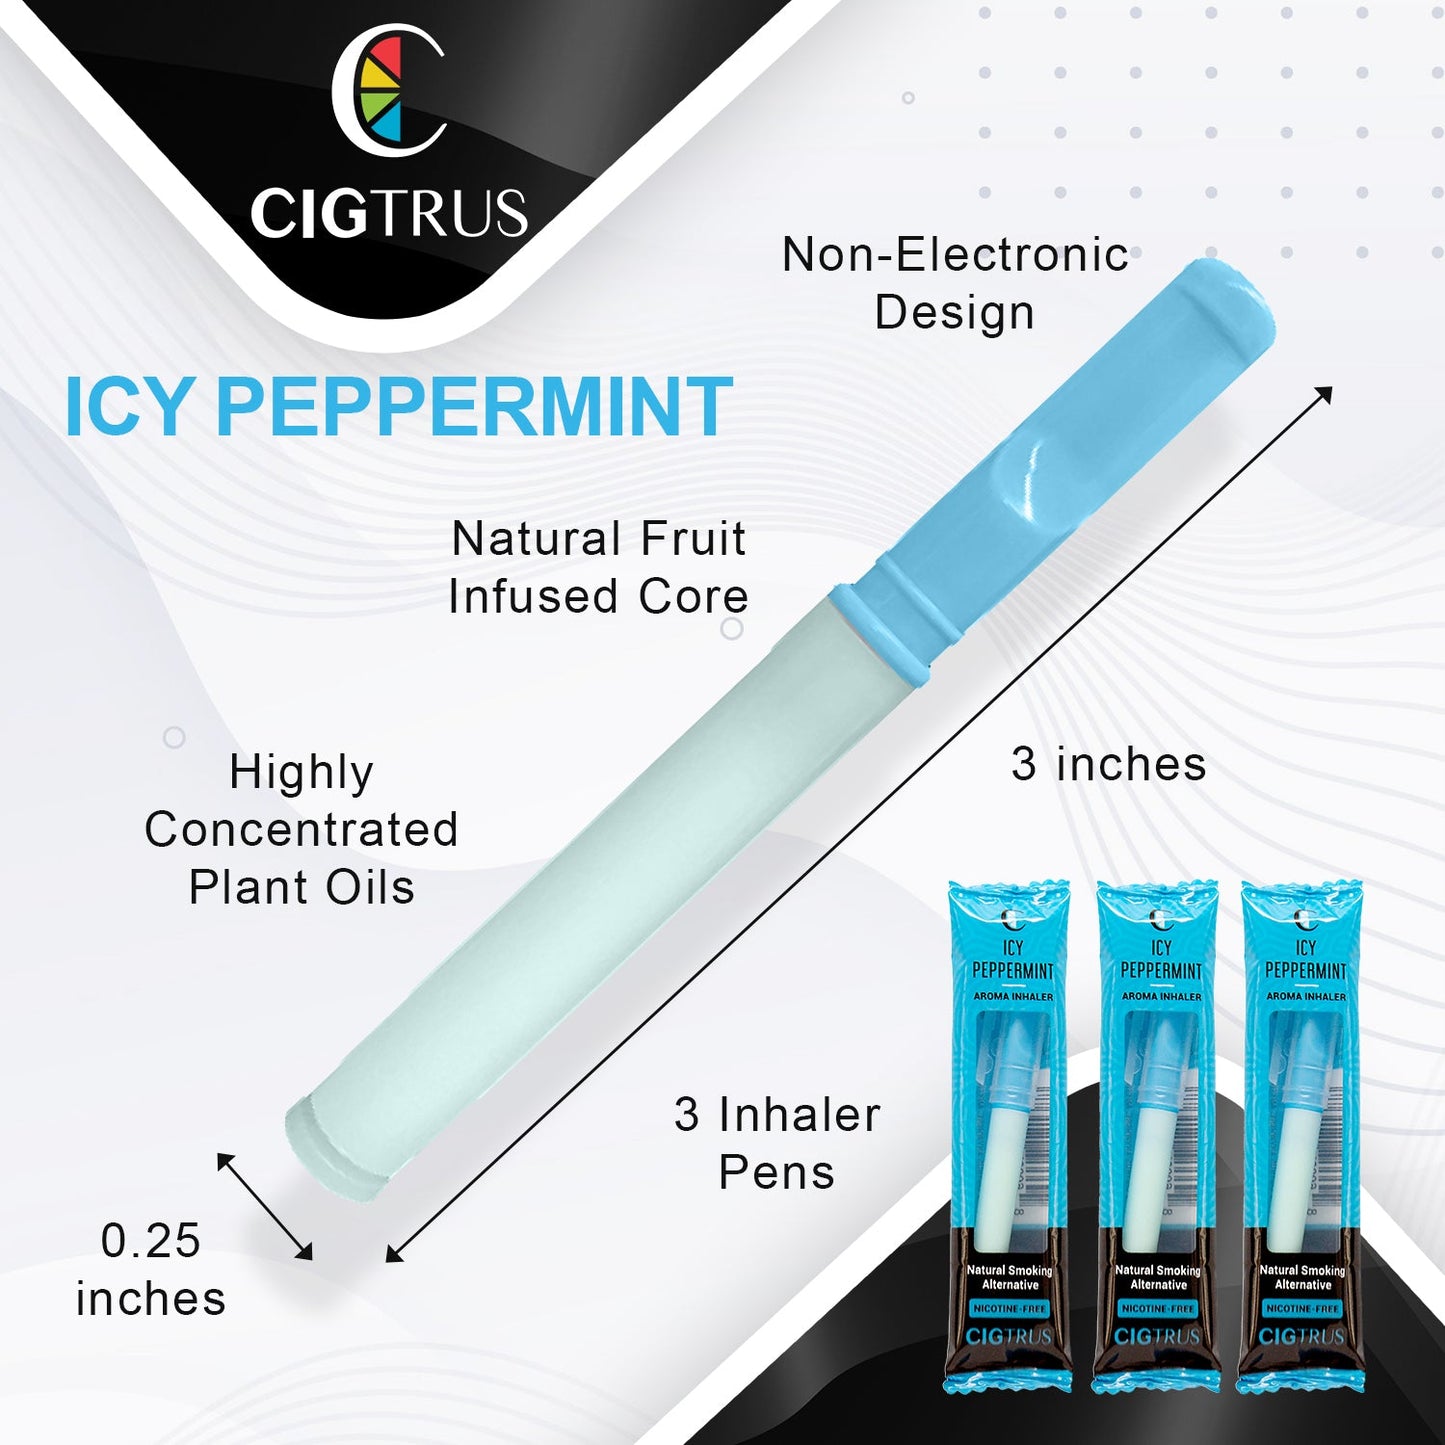 Cigtrus Aromatic Smokeless Oxygen Air Inhaler Oral Fixation Relief Natural Quit Aid Behavioral Support – Icy Peppermint Flavor 20/ Box - cigtrus.comcigtrus.com